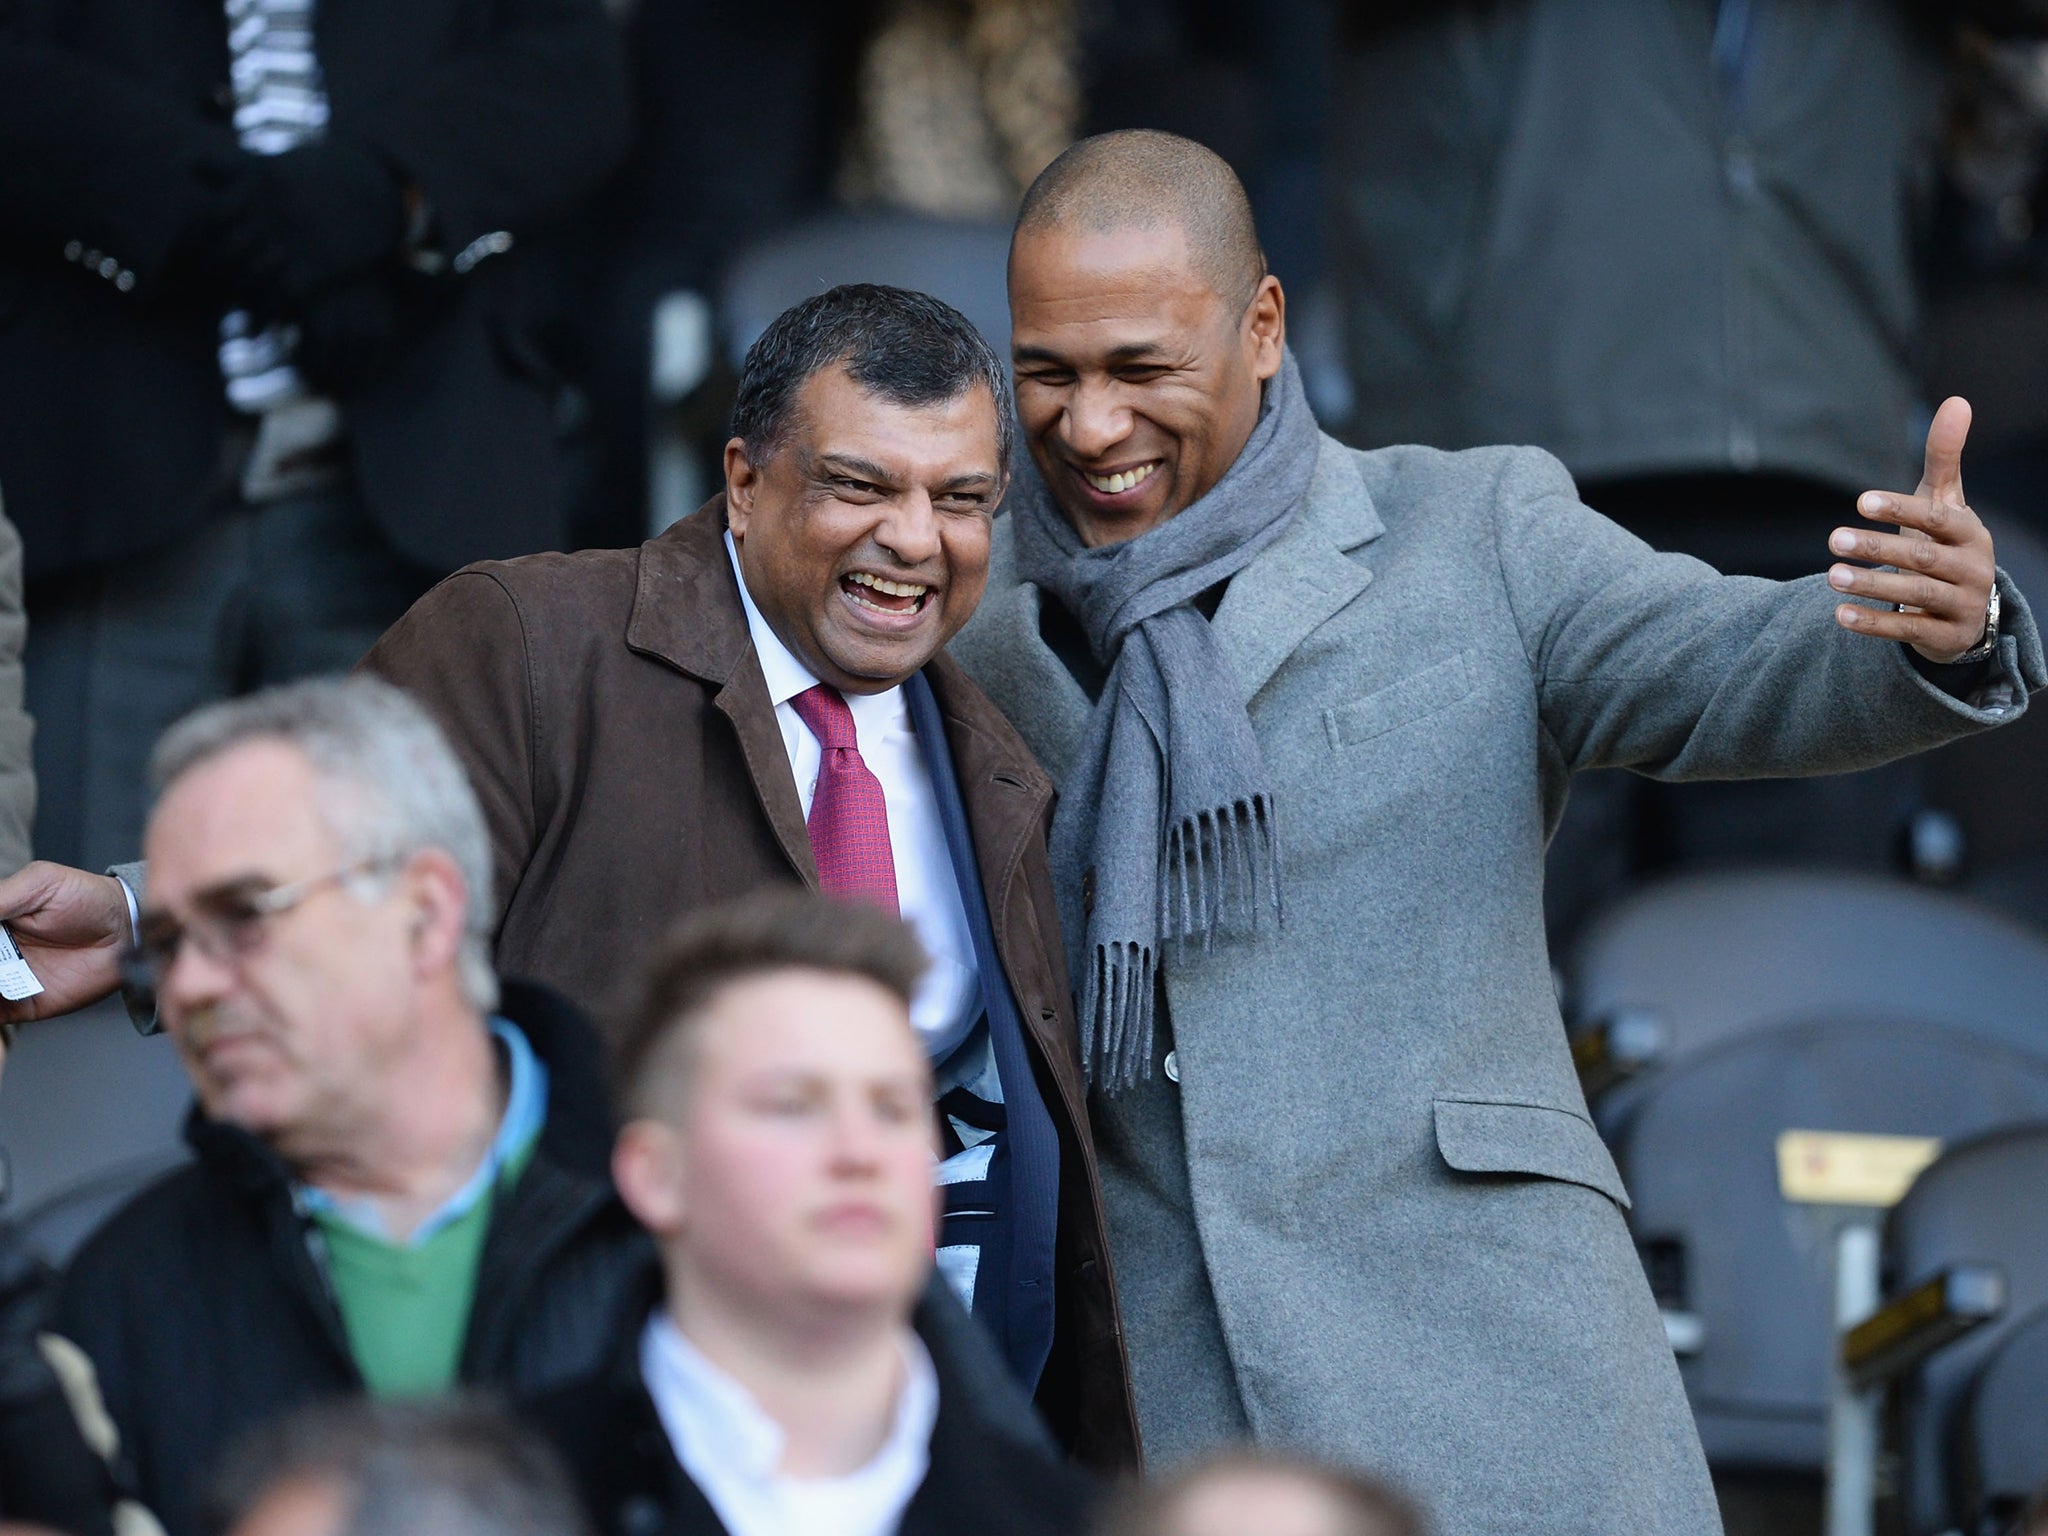 With QPR chairman Tony Fernandes